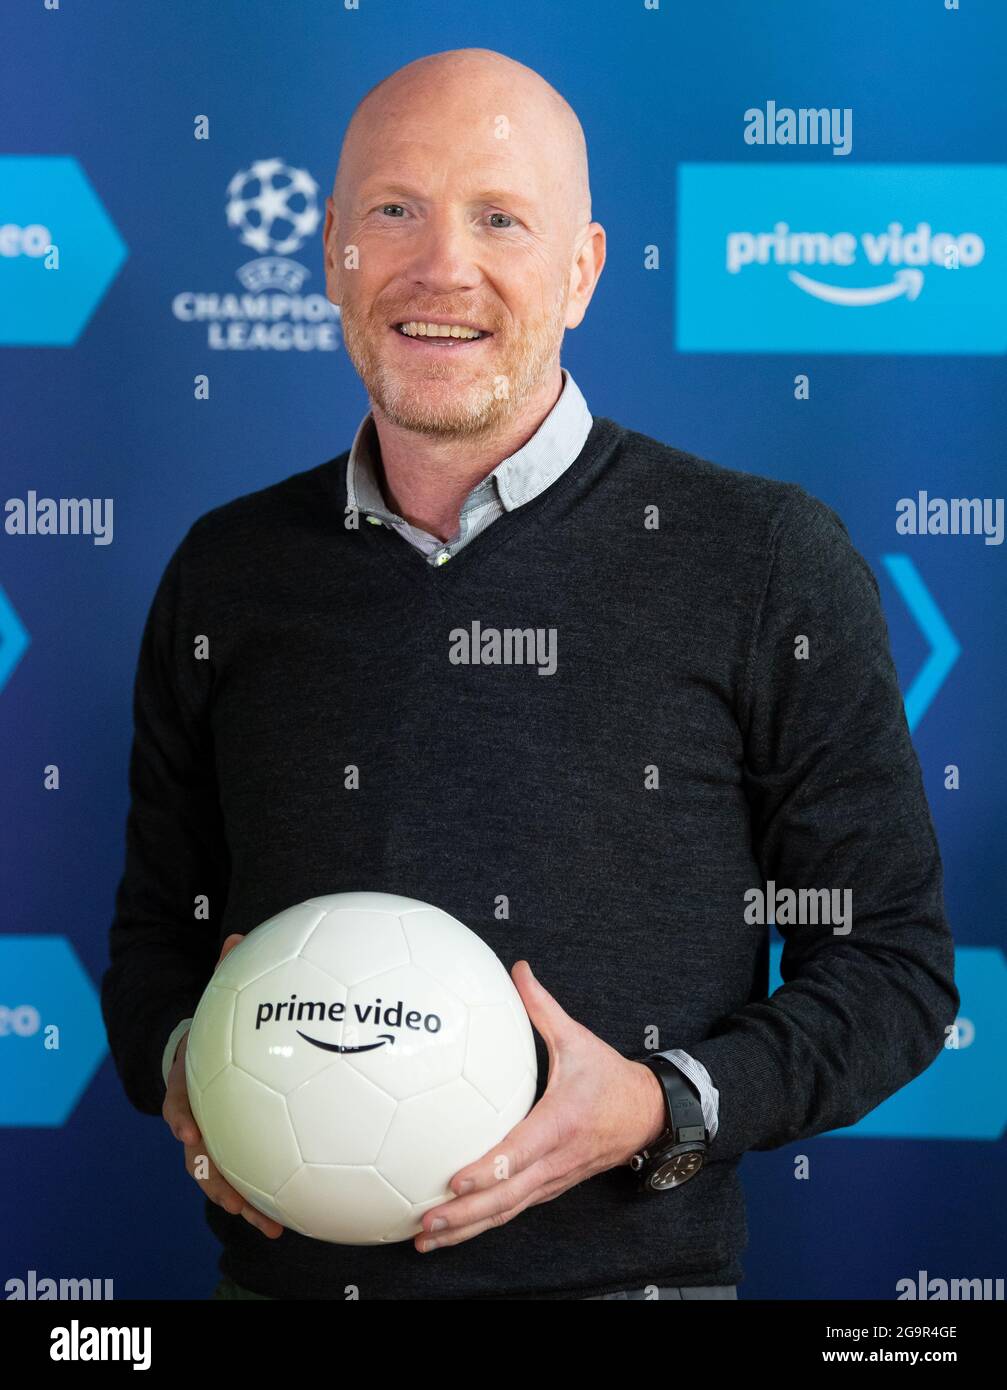 Munich, Germany. 27th July, 2021. Matthias Sammer, TV expert, takes part in  a press conference of Amazon Prime Video. Amazon will be showing Champions  League matches from the 2021/22 season. On its